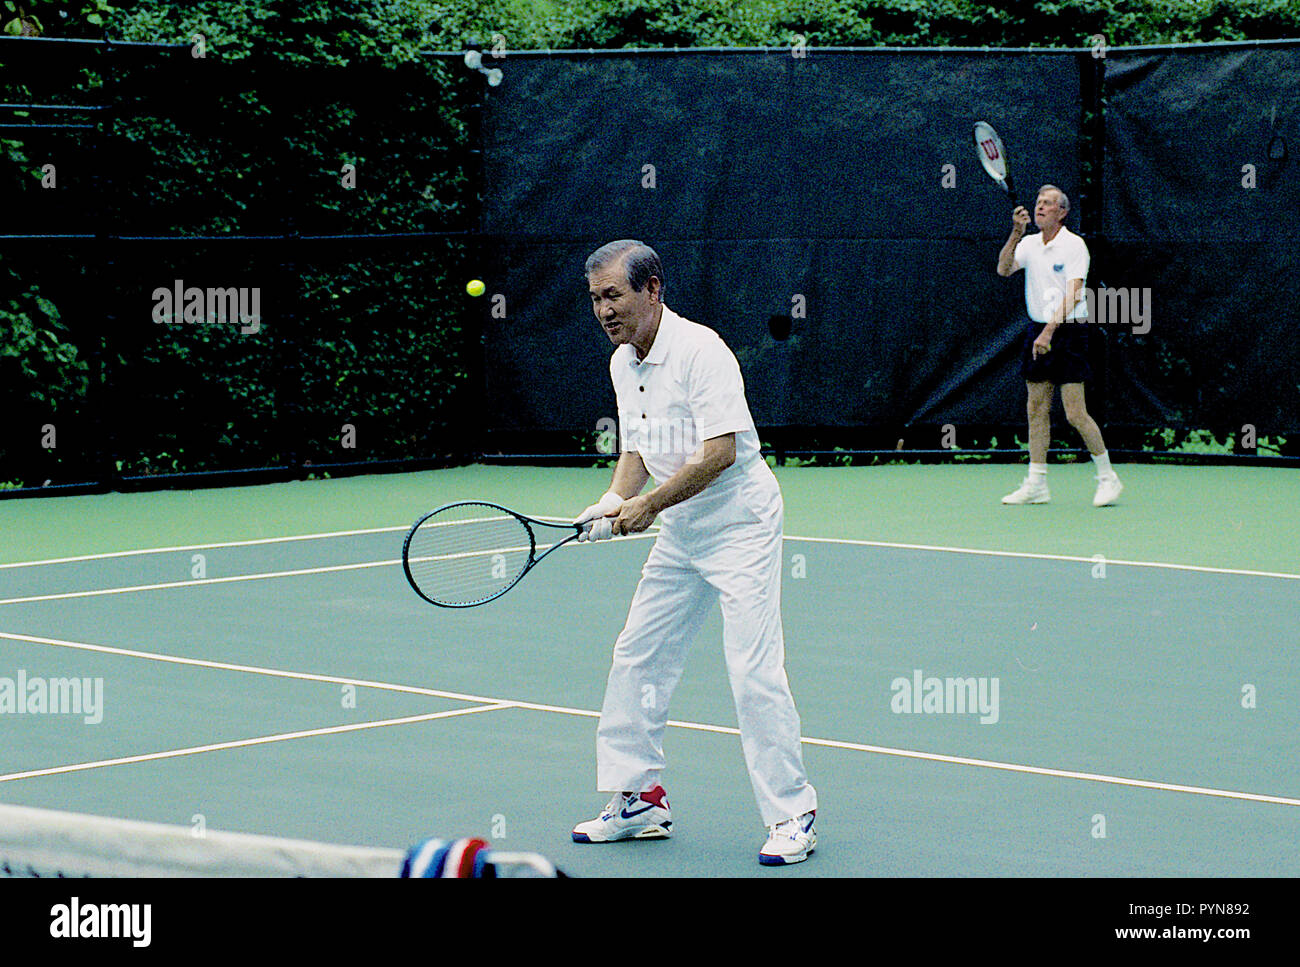 Washington, DC. 7-2-1991 President George H.W. Bush plays doubles tennis with South Korean President Roh Tae Woo, during President Woo's state visit to the White House.  Credit: Mark Reinstein /MediaPunch Stock Photo